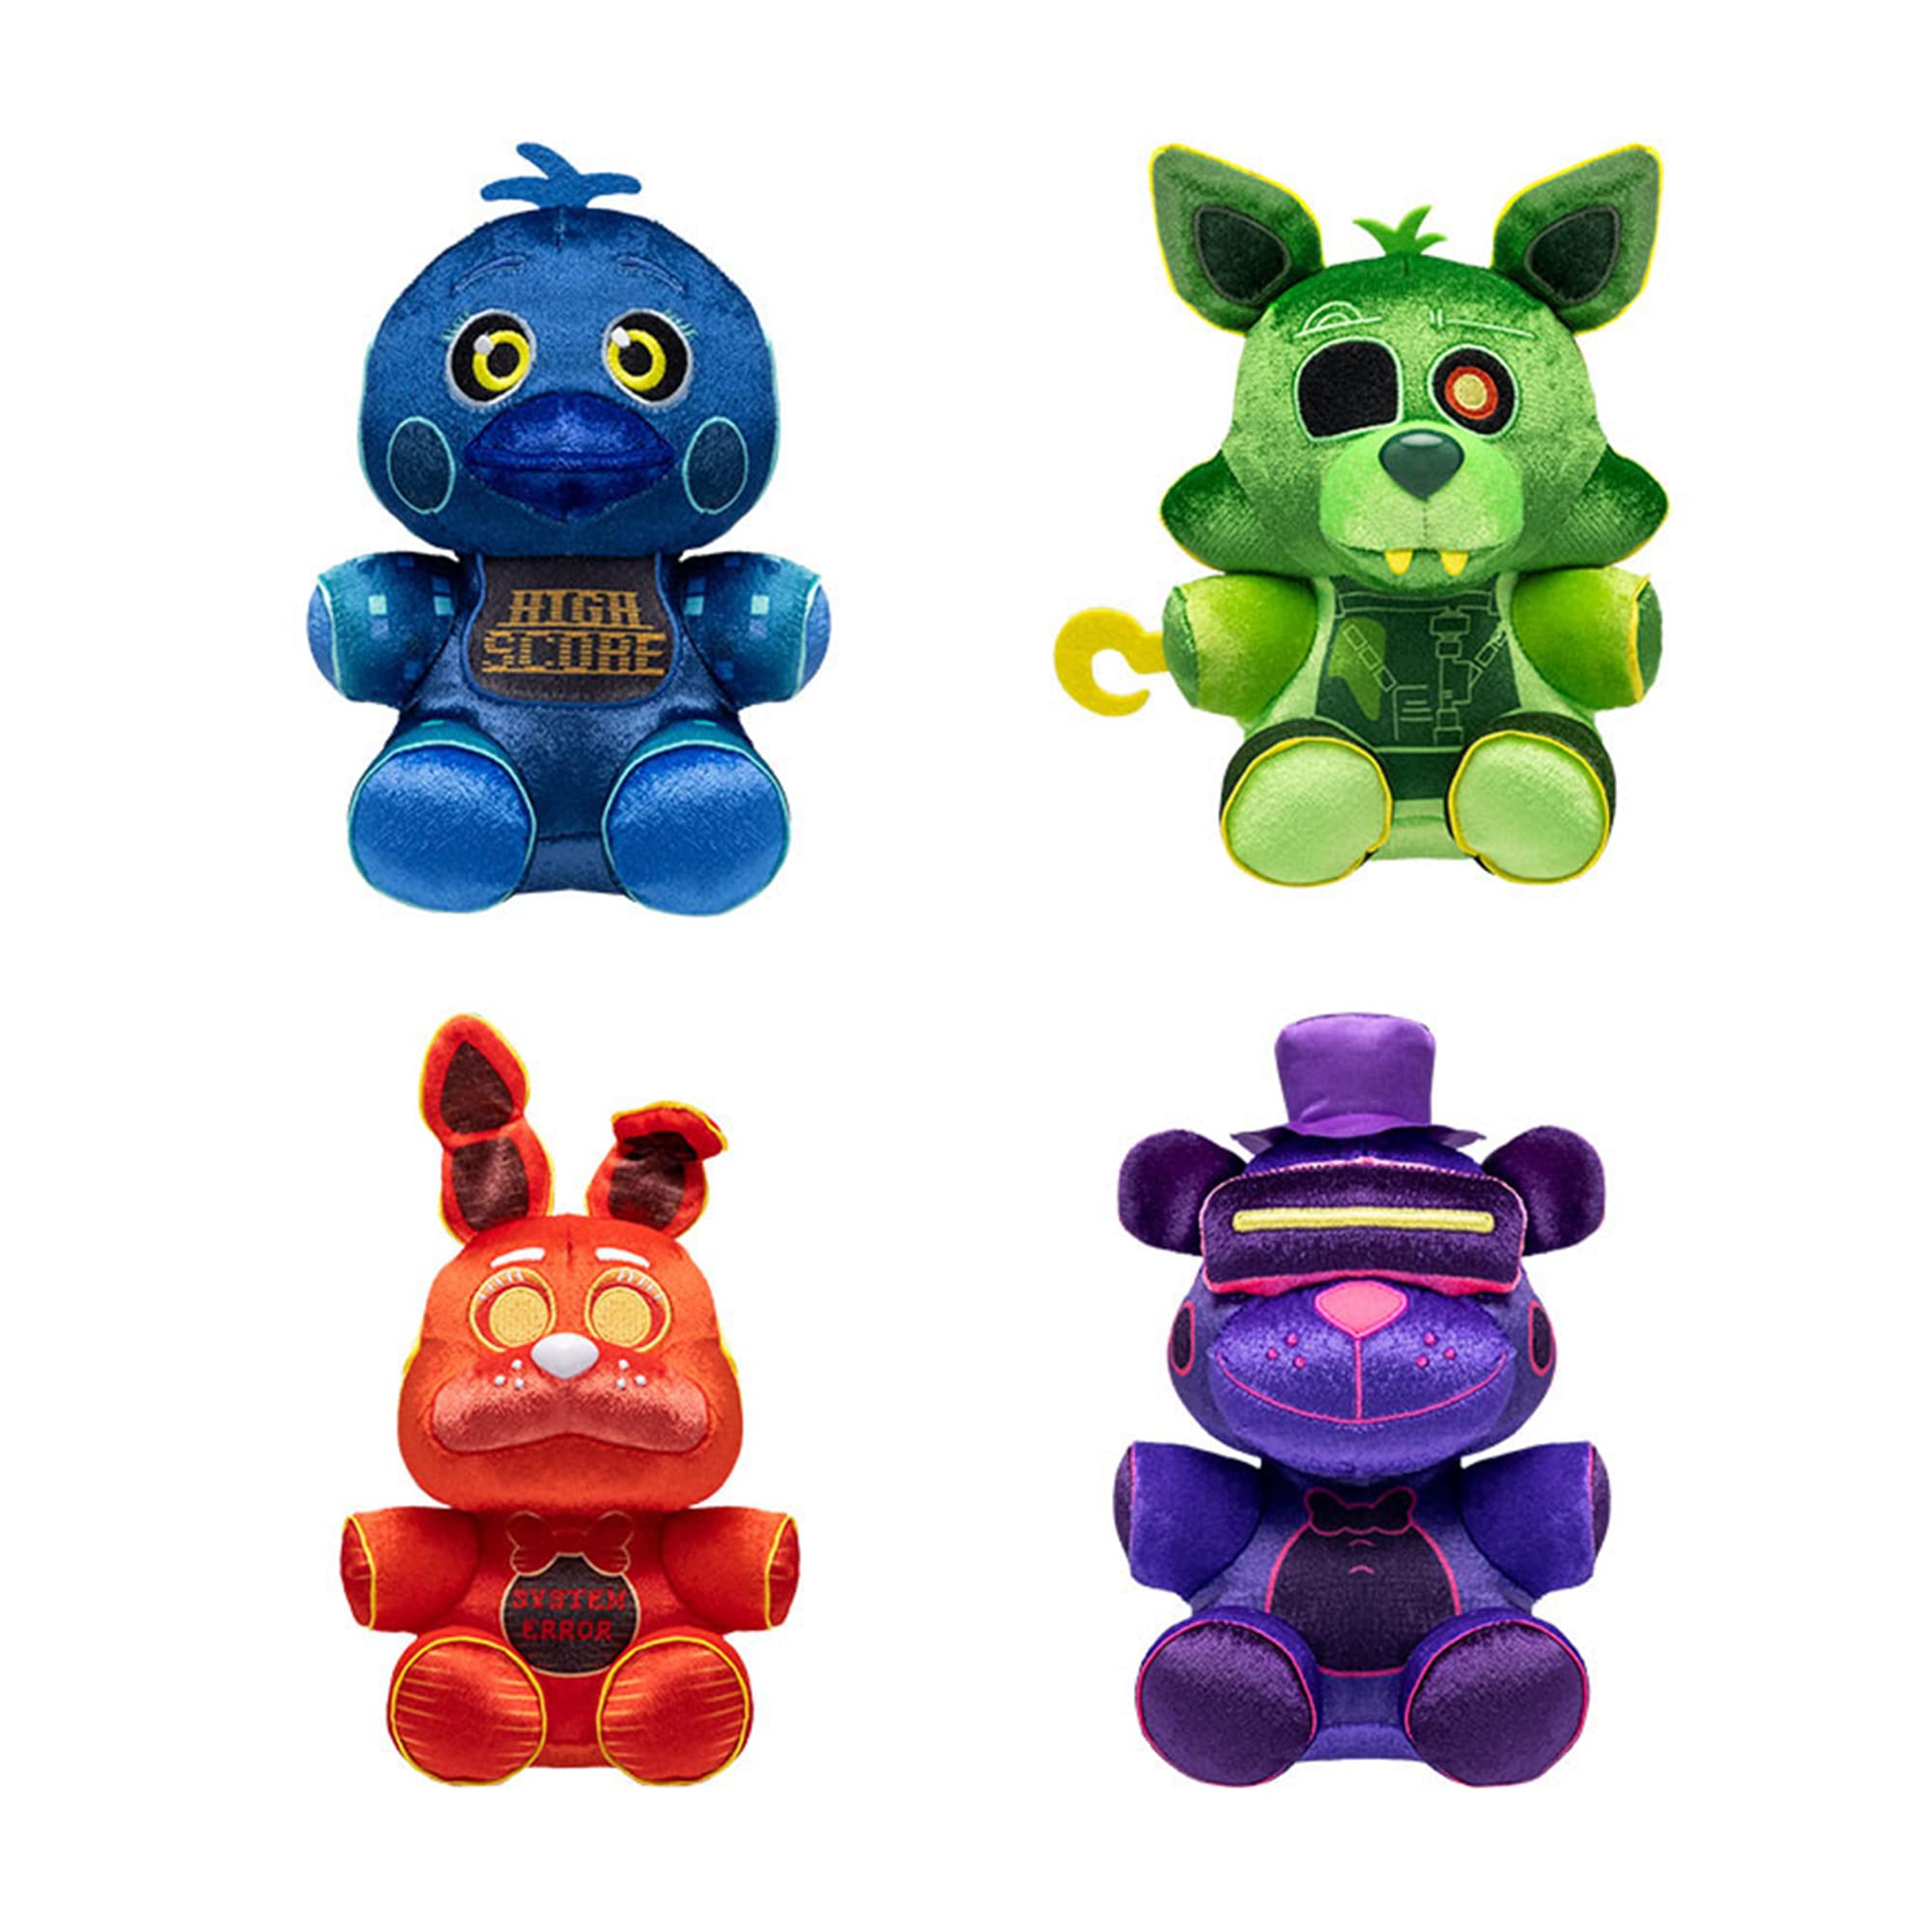 Funko POP! FNAF Five Nights at Freddy's Special Delivery Plush